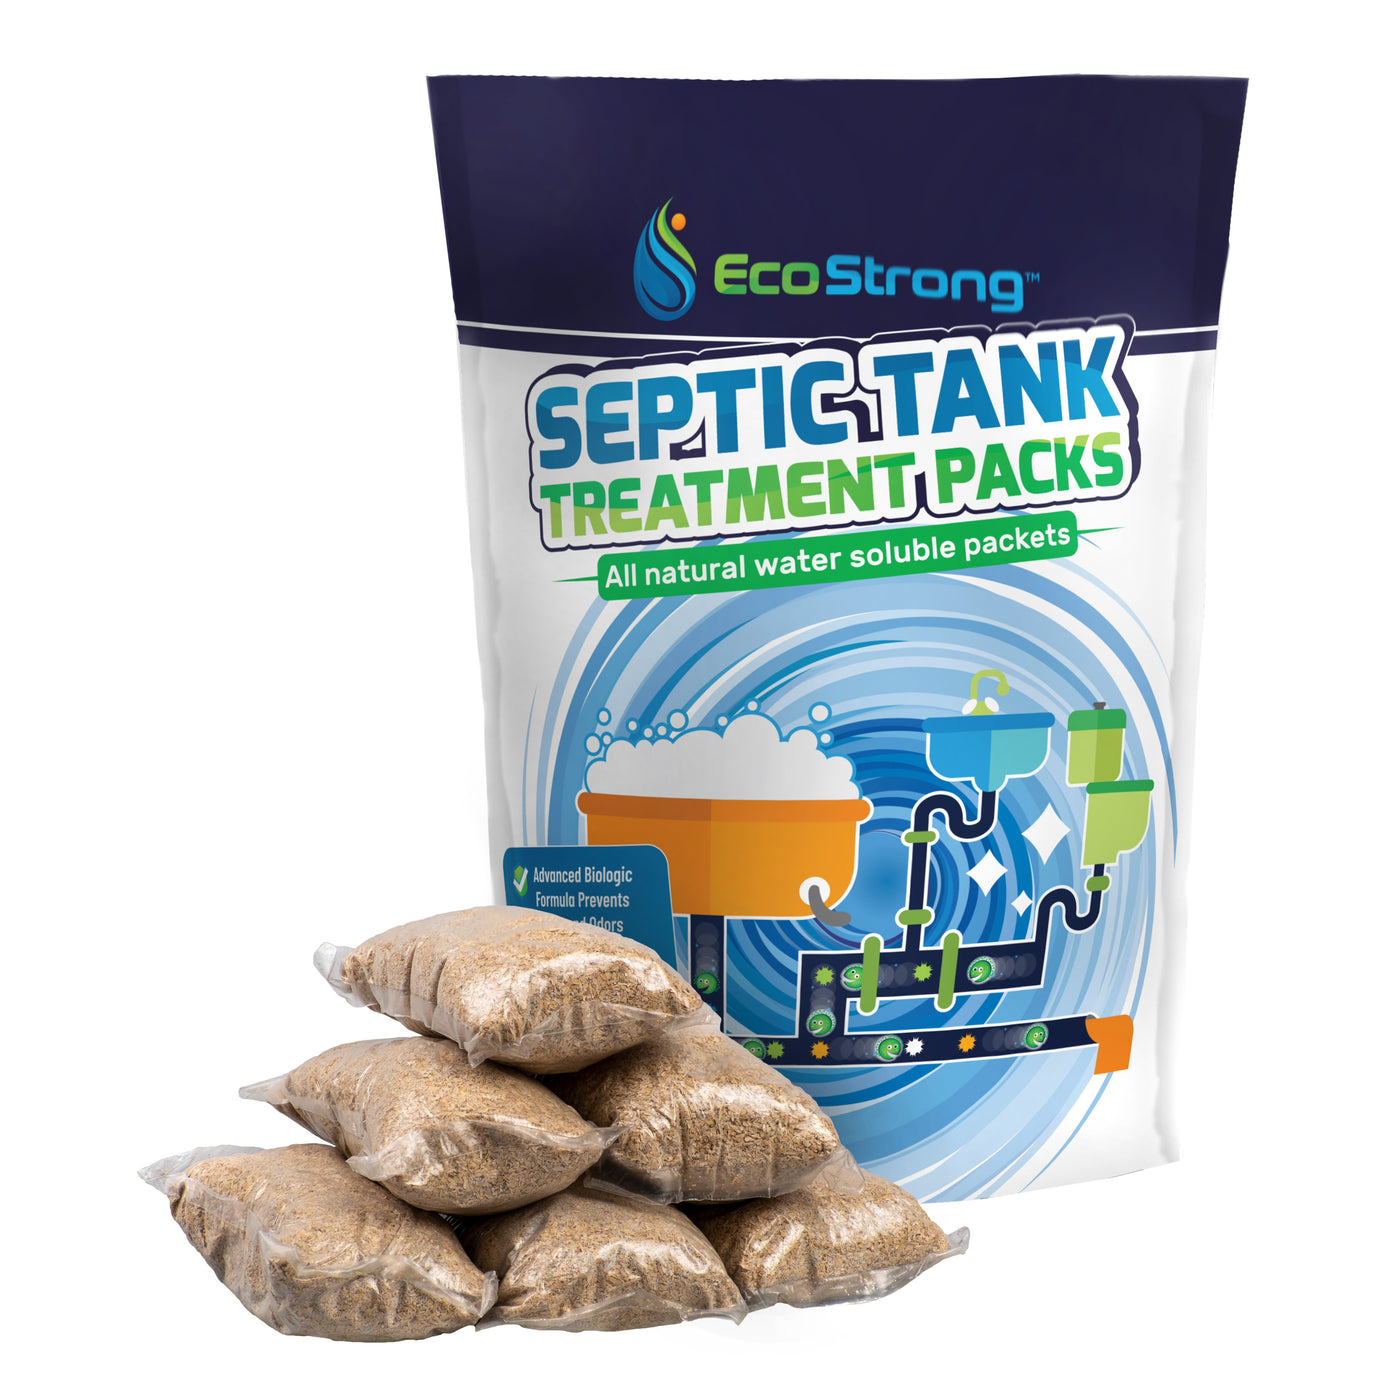 EcoStrong Septic Tank Treatment Packs#size_6-x-1-oz-packs